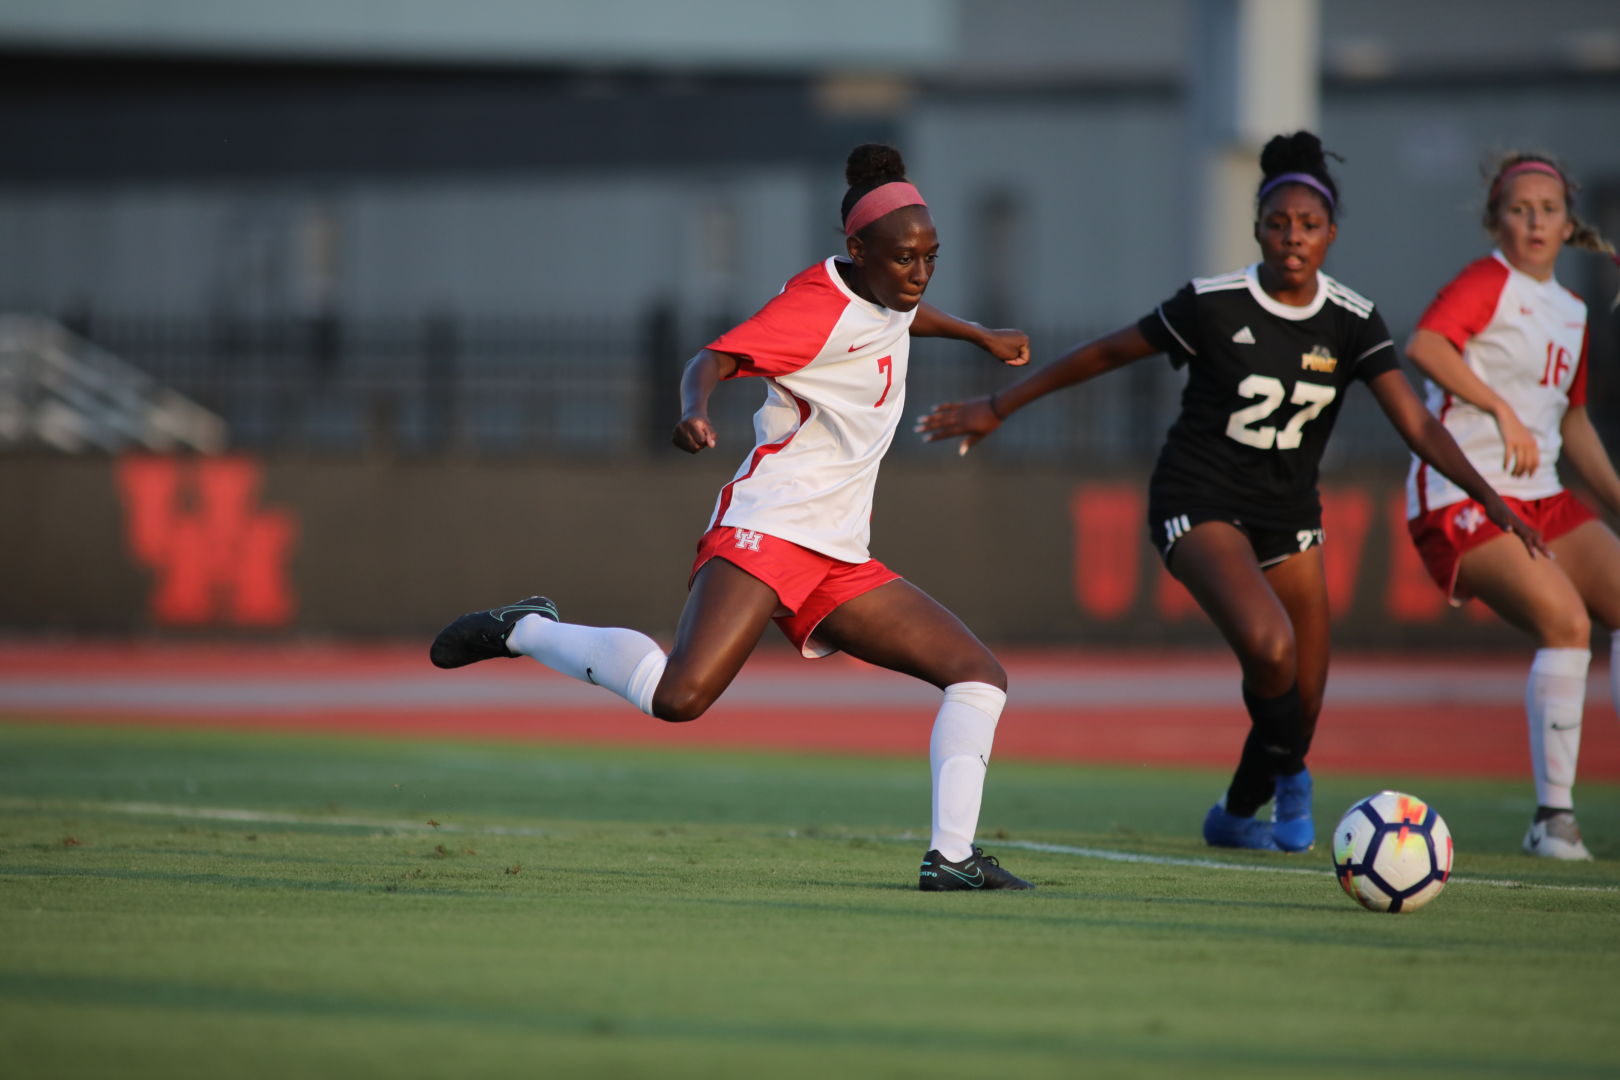 Senior forward Desiree Bowen scored Houston's second goal to put the Cougars up 2-0 in the first half. | File photo